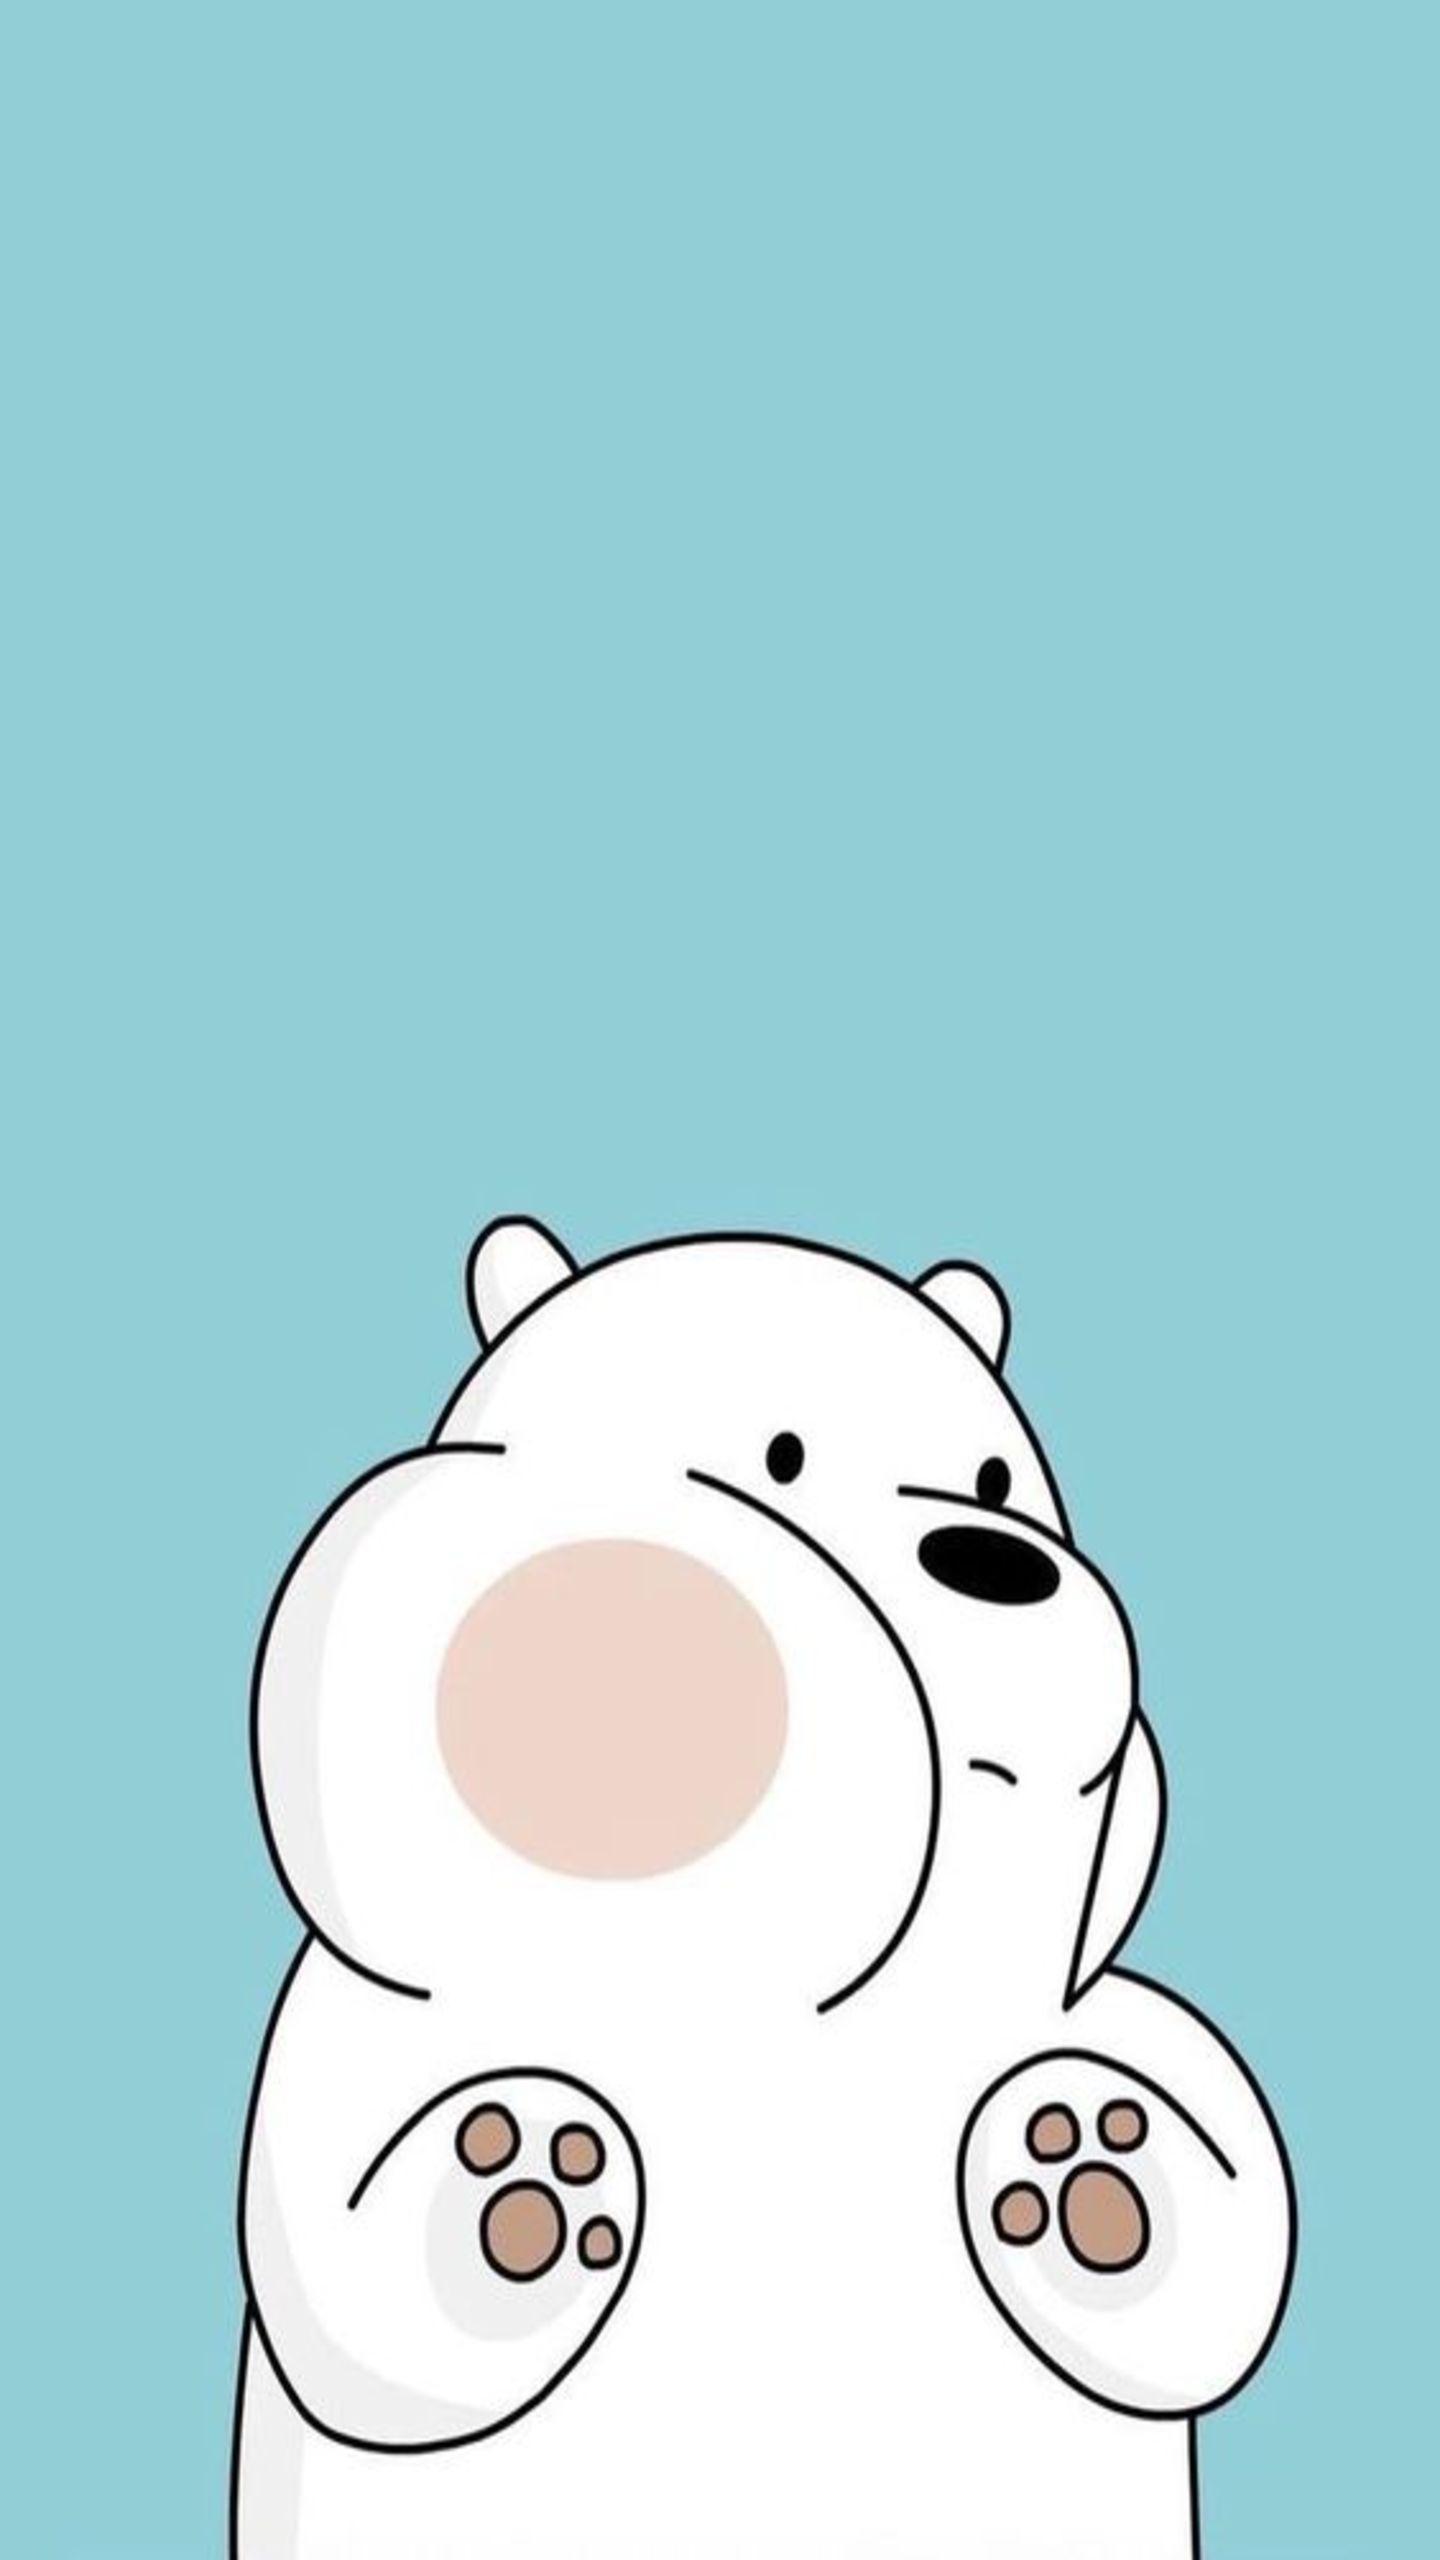 Cute Bear Wallpaper for Android